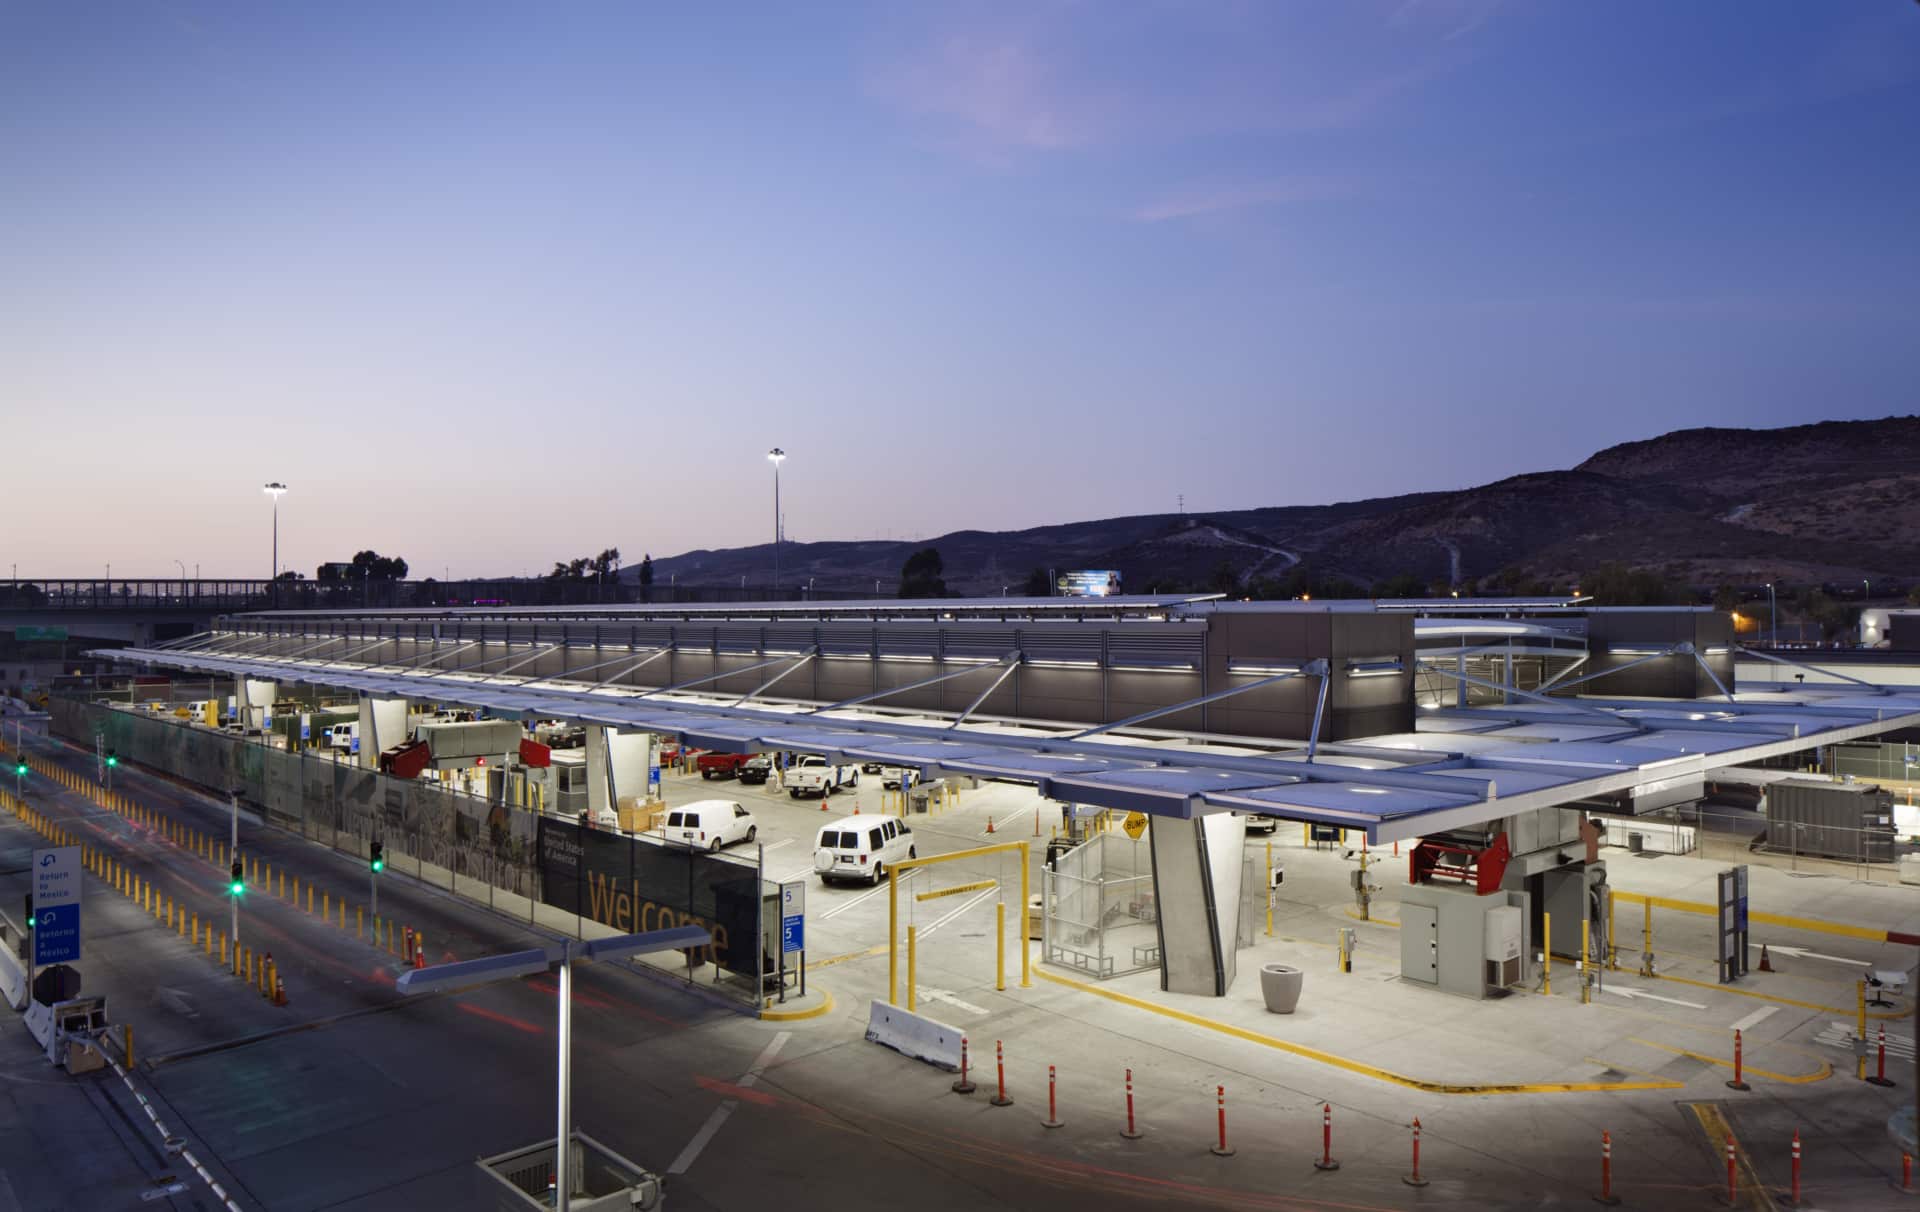 New point of entry crossing at San Ysidro, CA designed by Miller Hull of Seattle, WA and San Diego, CA.